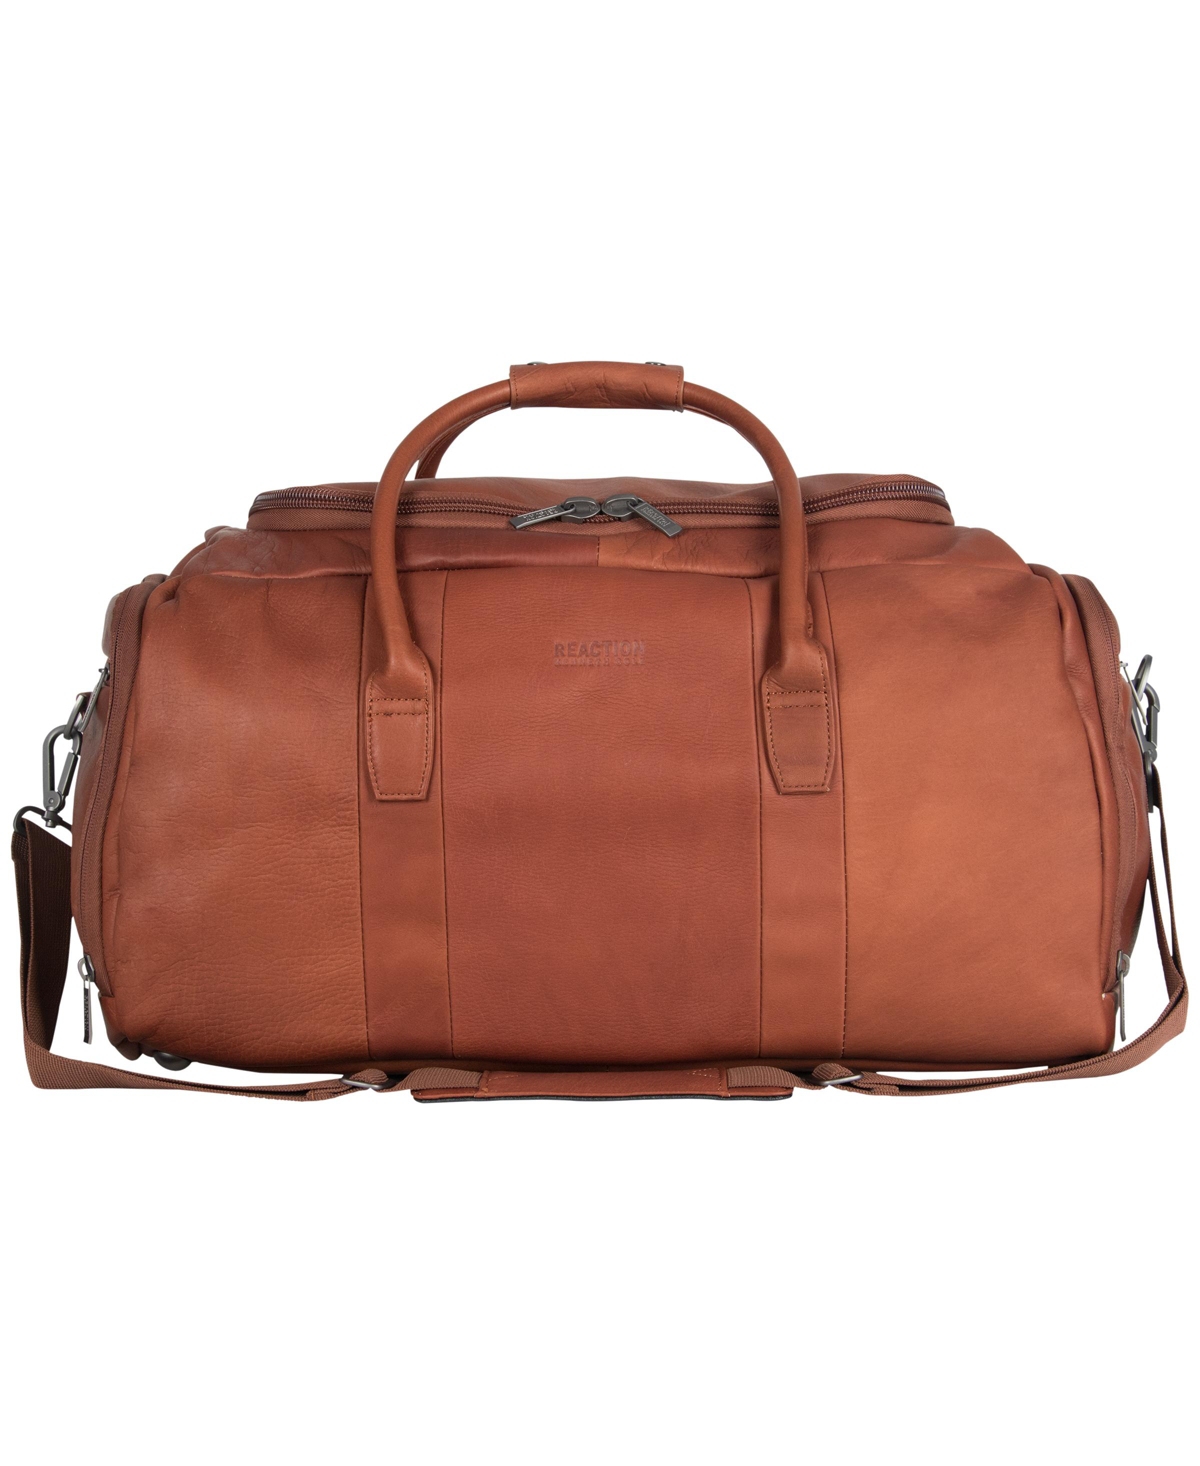 Colombian Leather 20" Single Compartment Top Load Travel Duffel Bag - Cognac